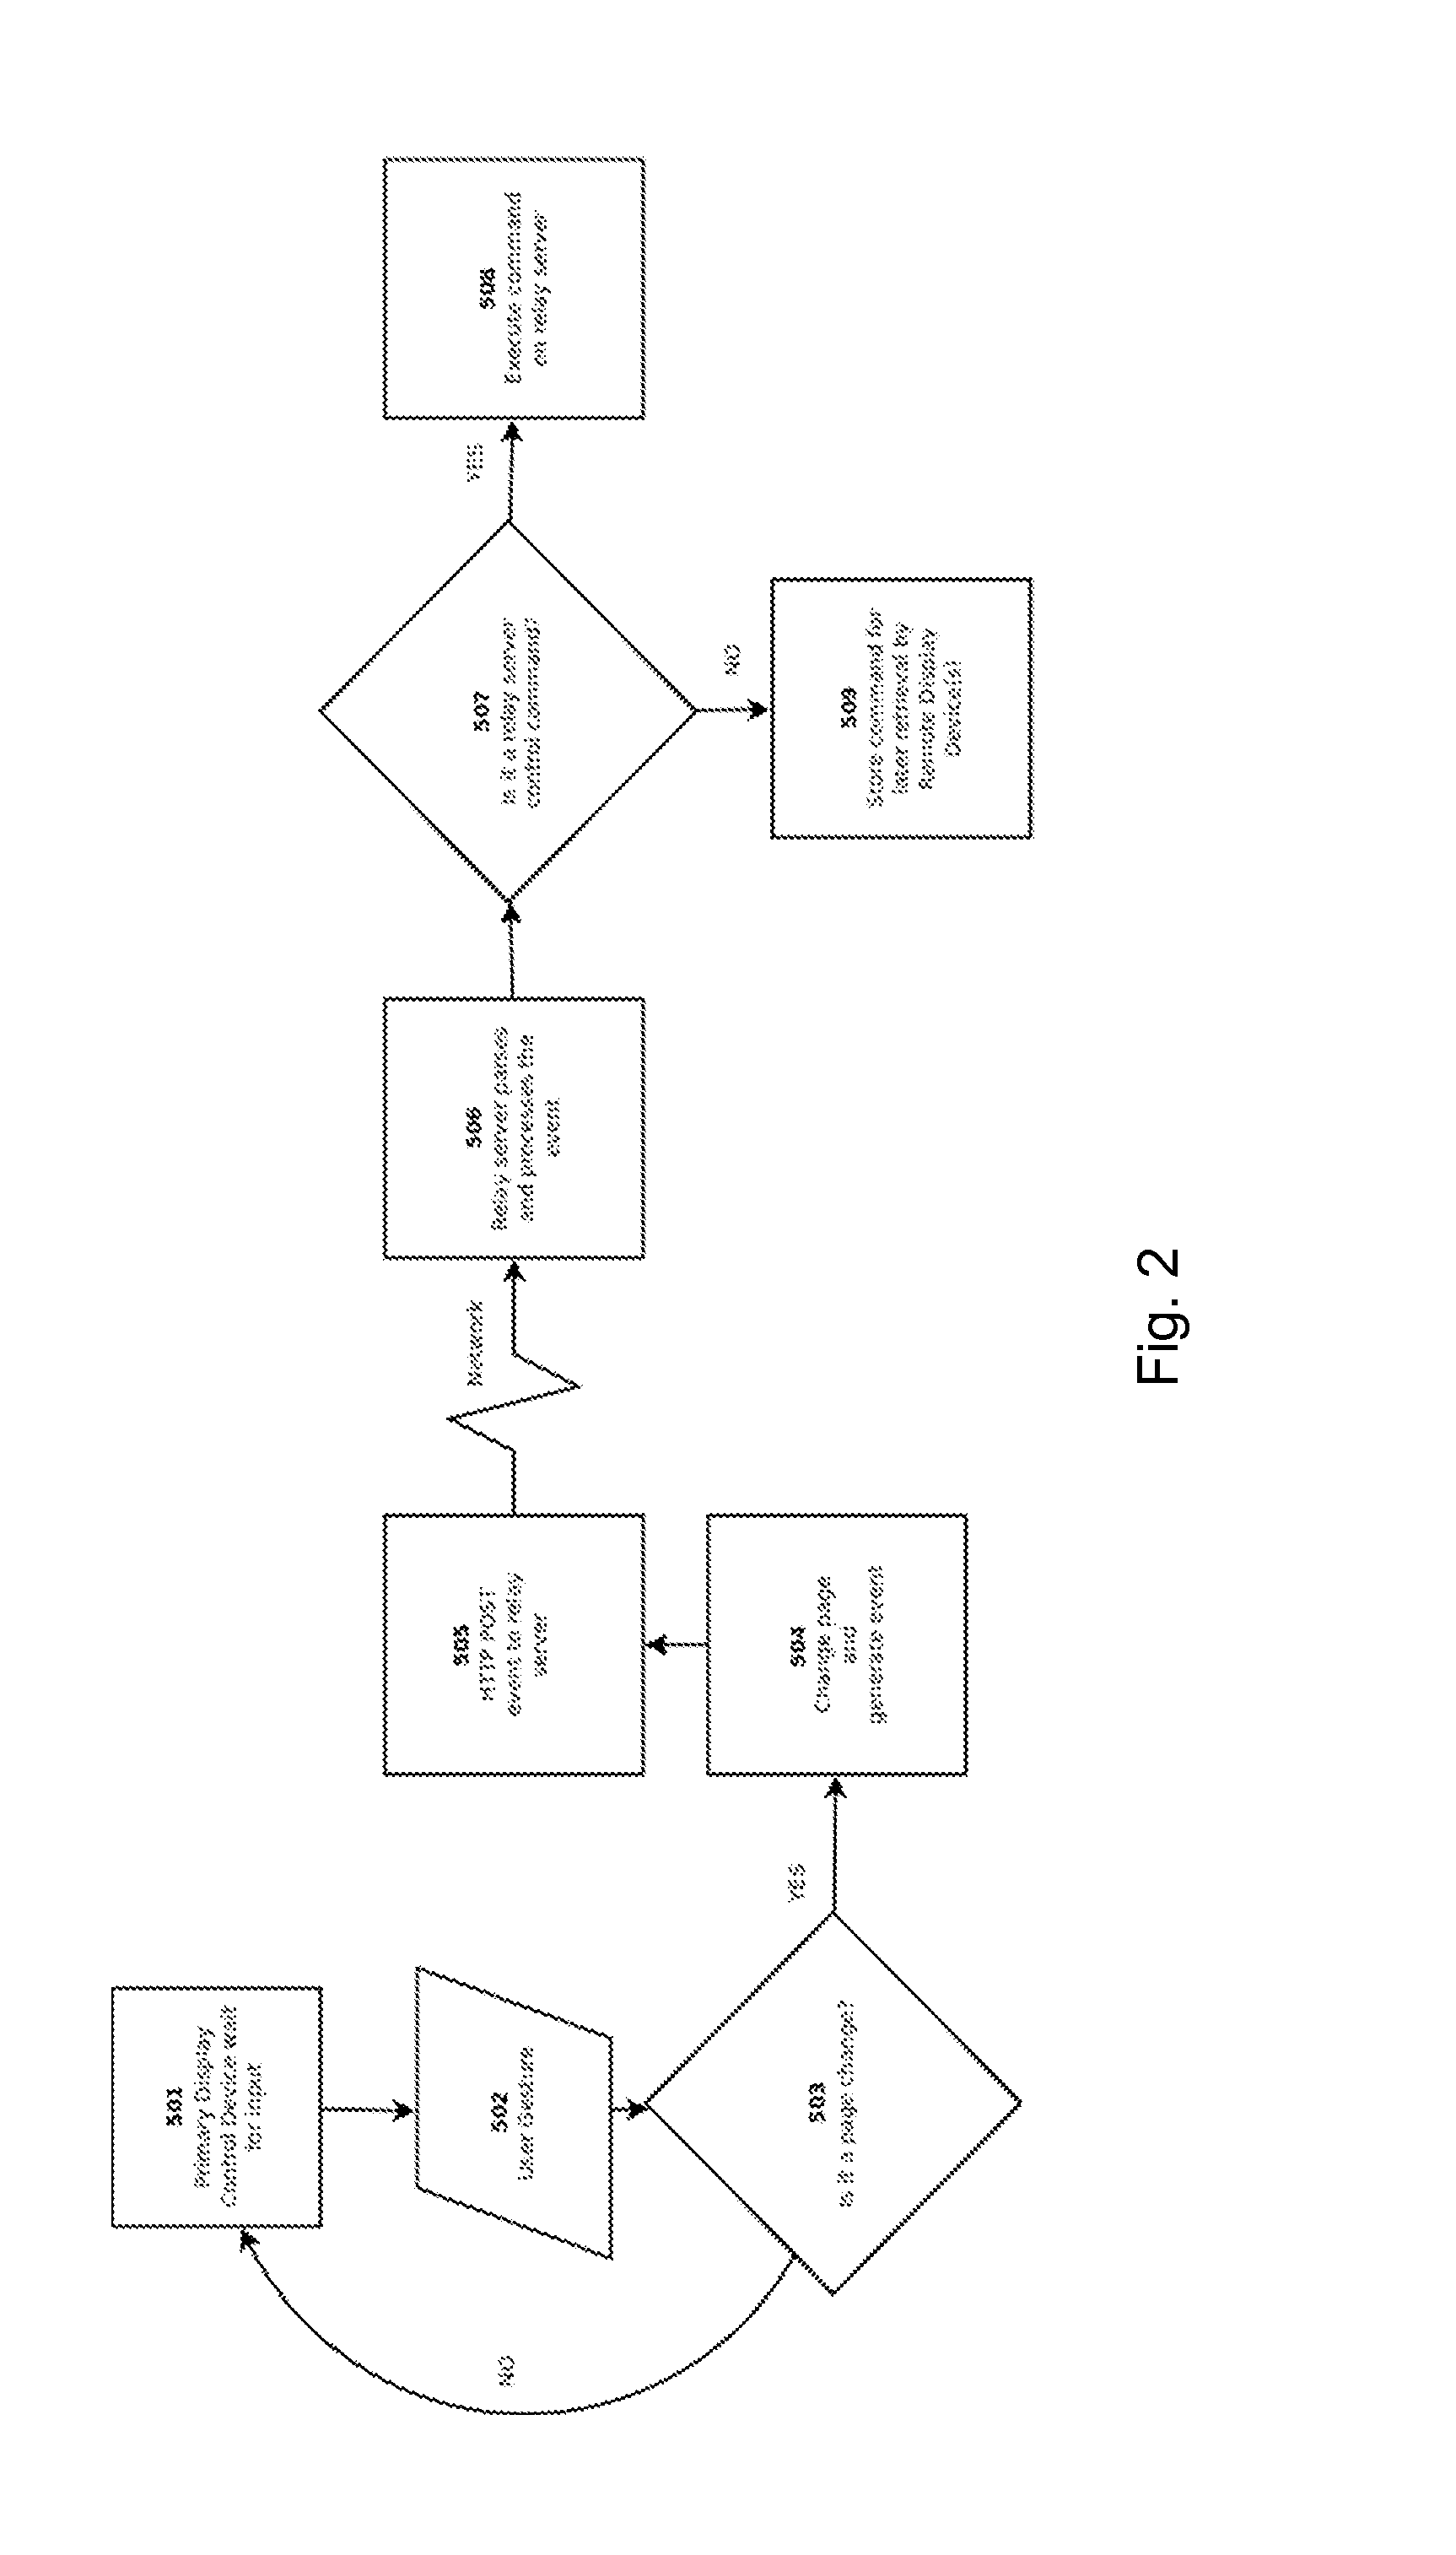 Device Relay Control System and Method